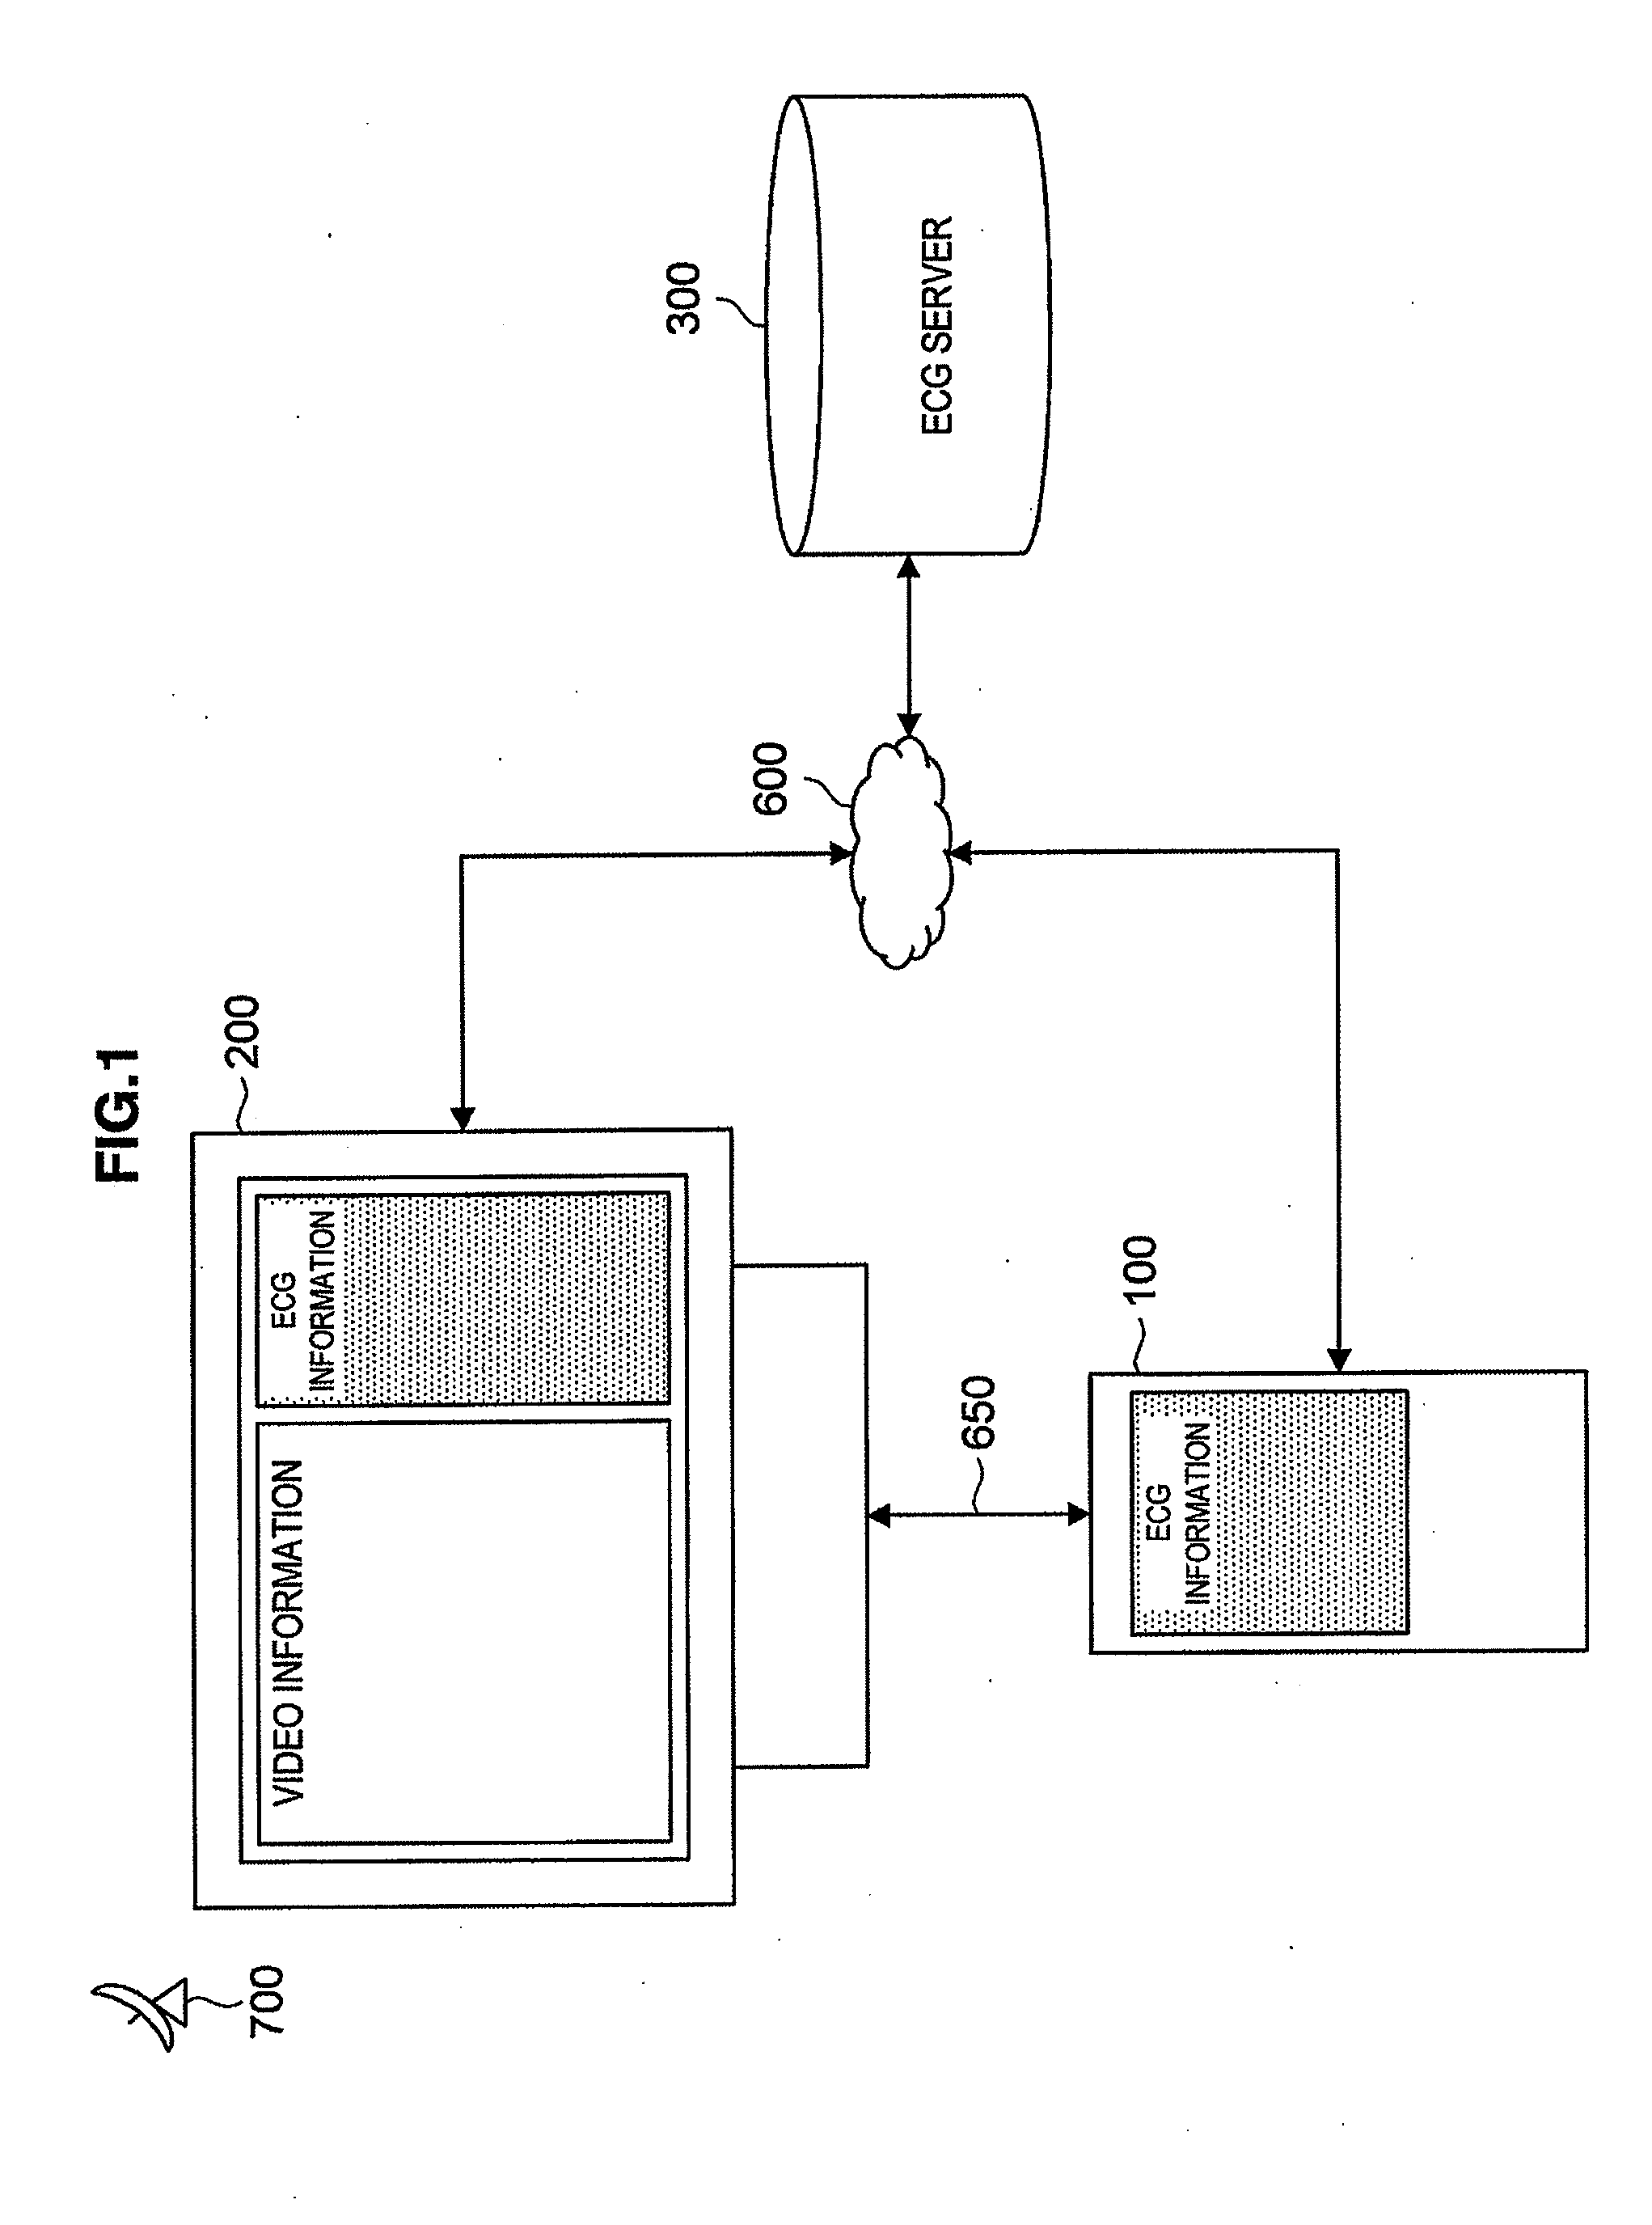 Remote control terminal, information acquiring apparatus, information providing apparatus, information providing system, information providing method, and program